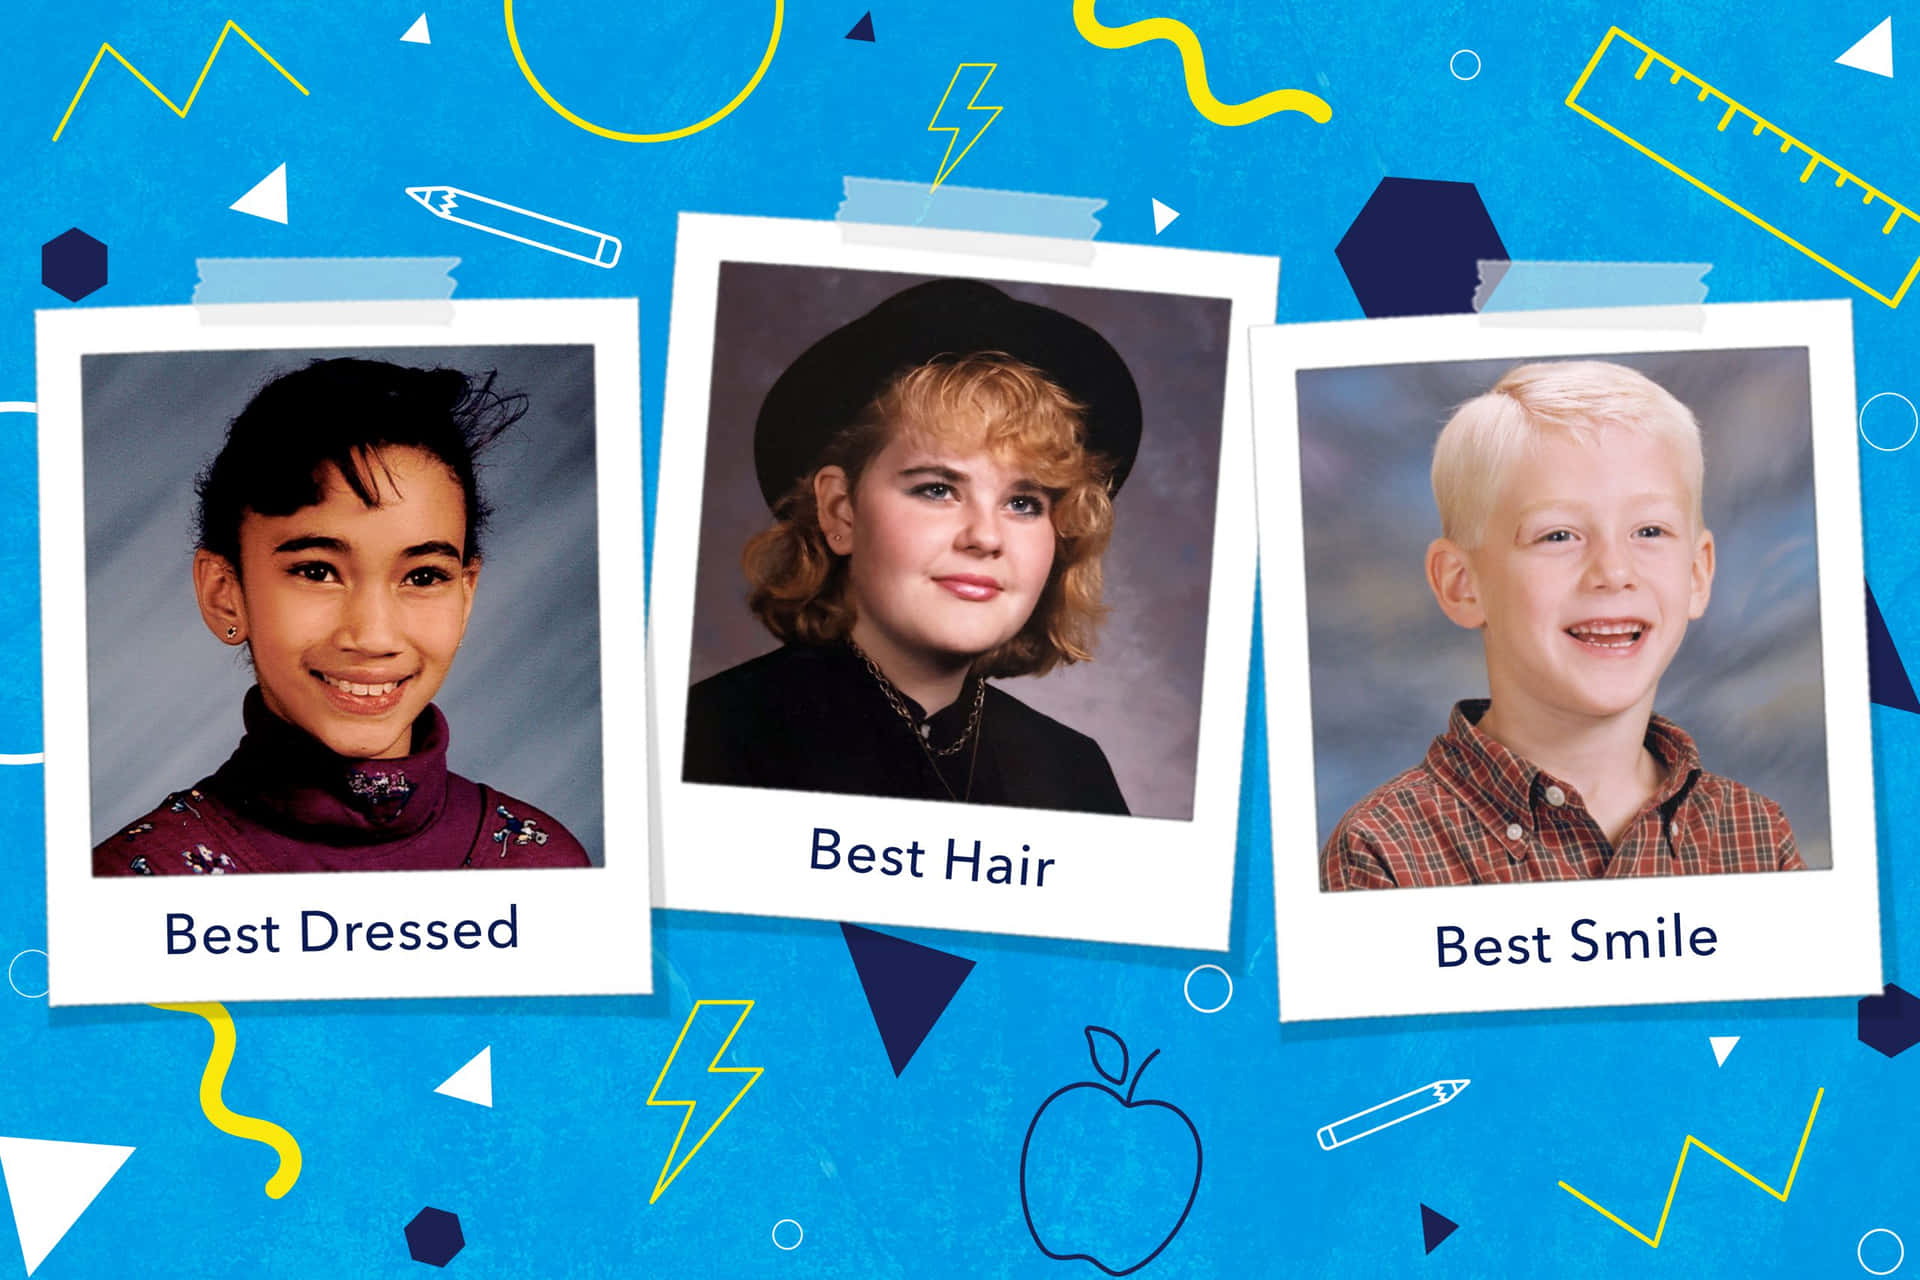 A Group Of Pictures Of Children With Their Best Dressed